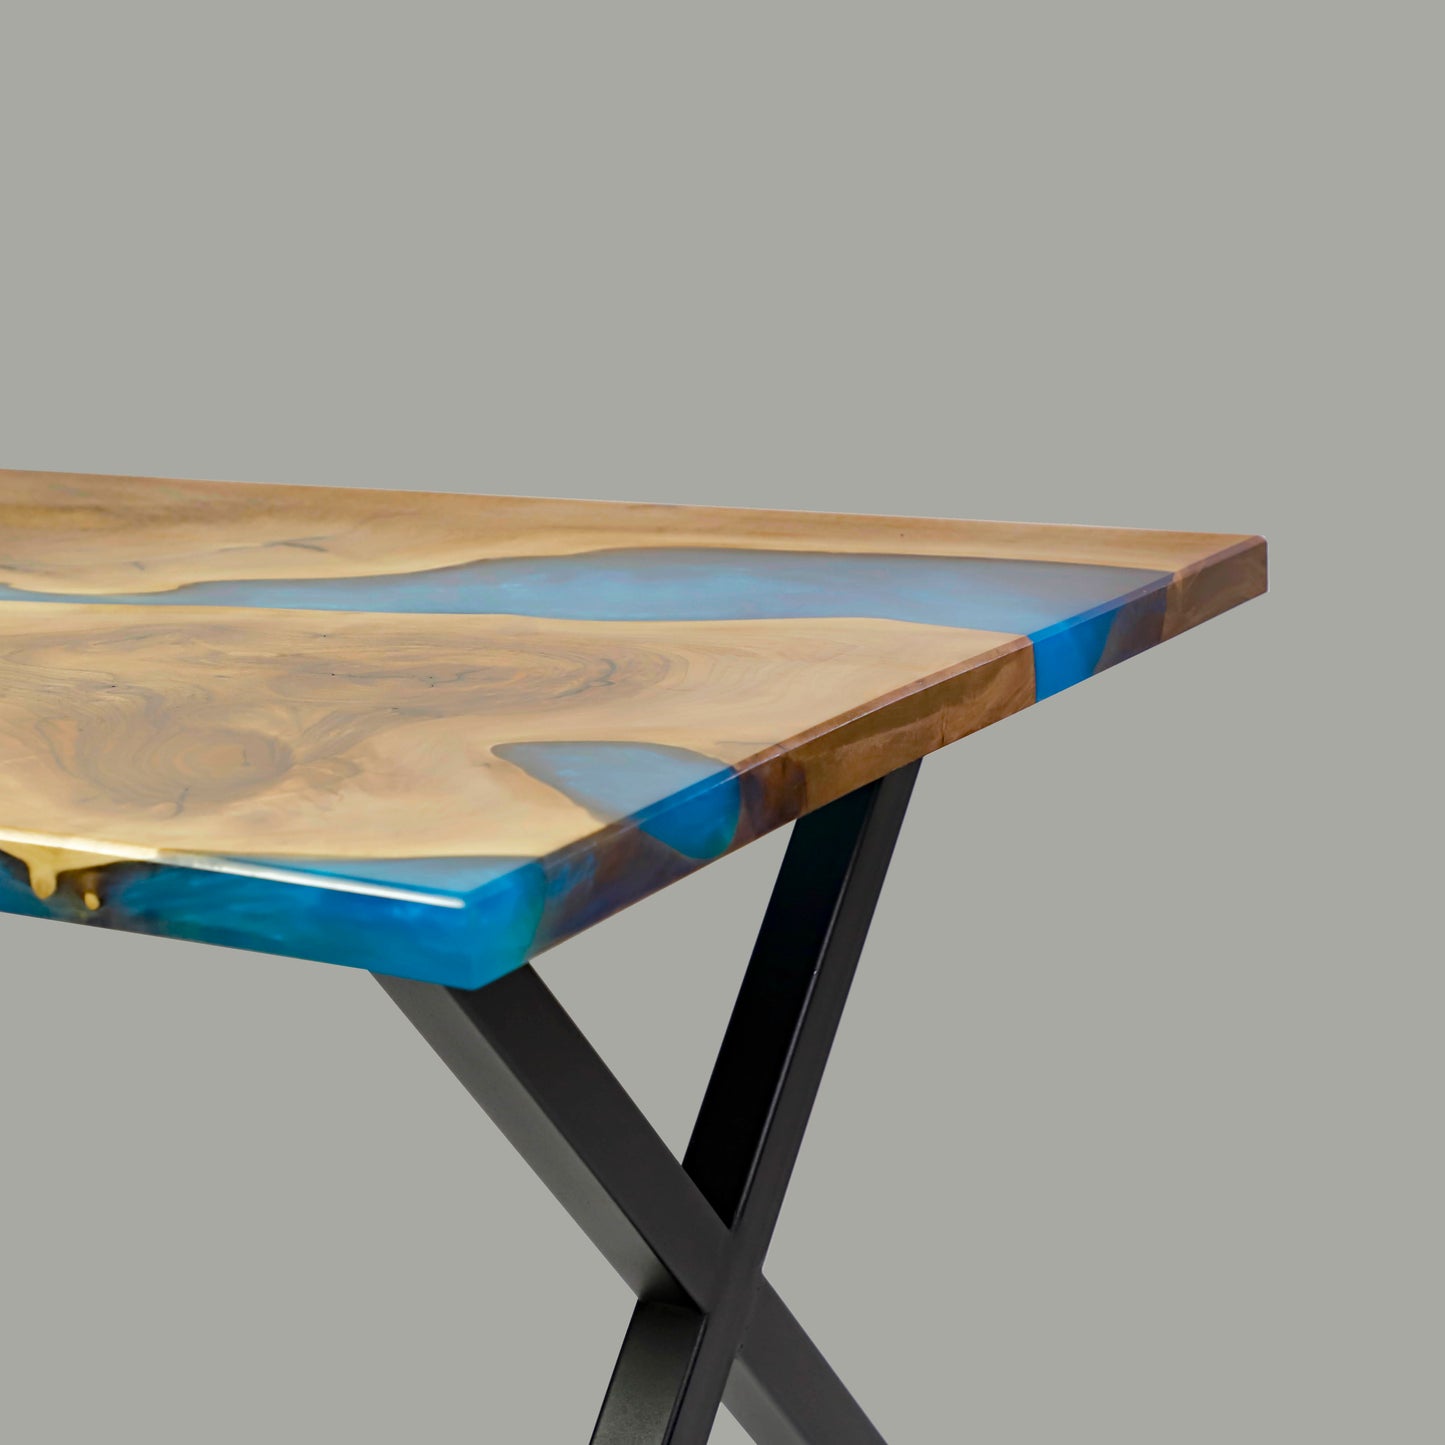 Dining table made from wood and epoxy resin in the color classic blue